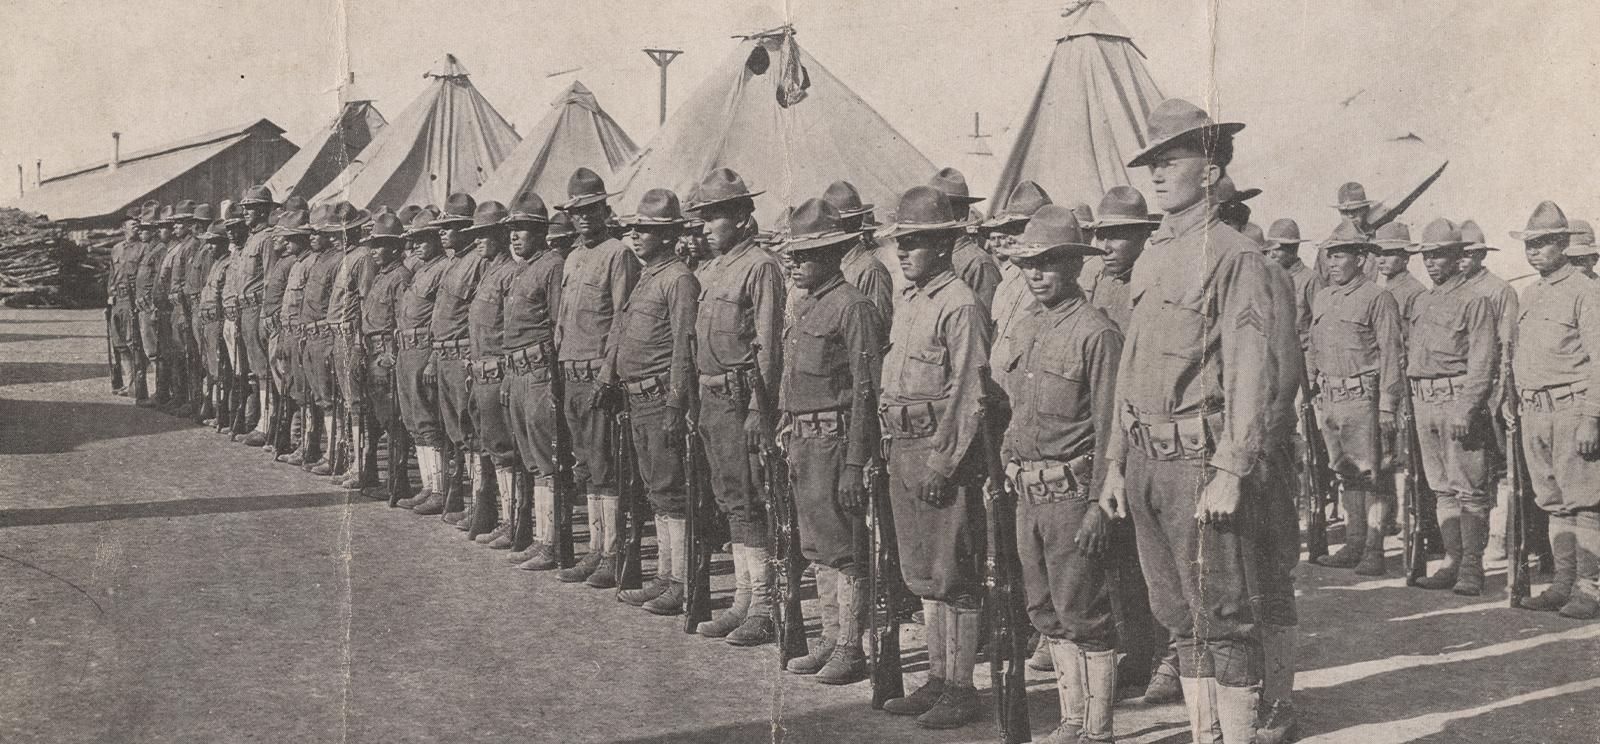 Black and white photograph of two rows of Native American soldiers standing at attention in front of tents and barracks.